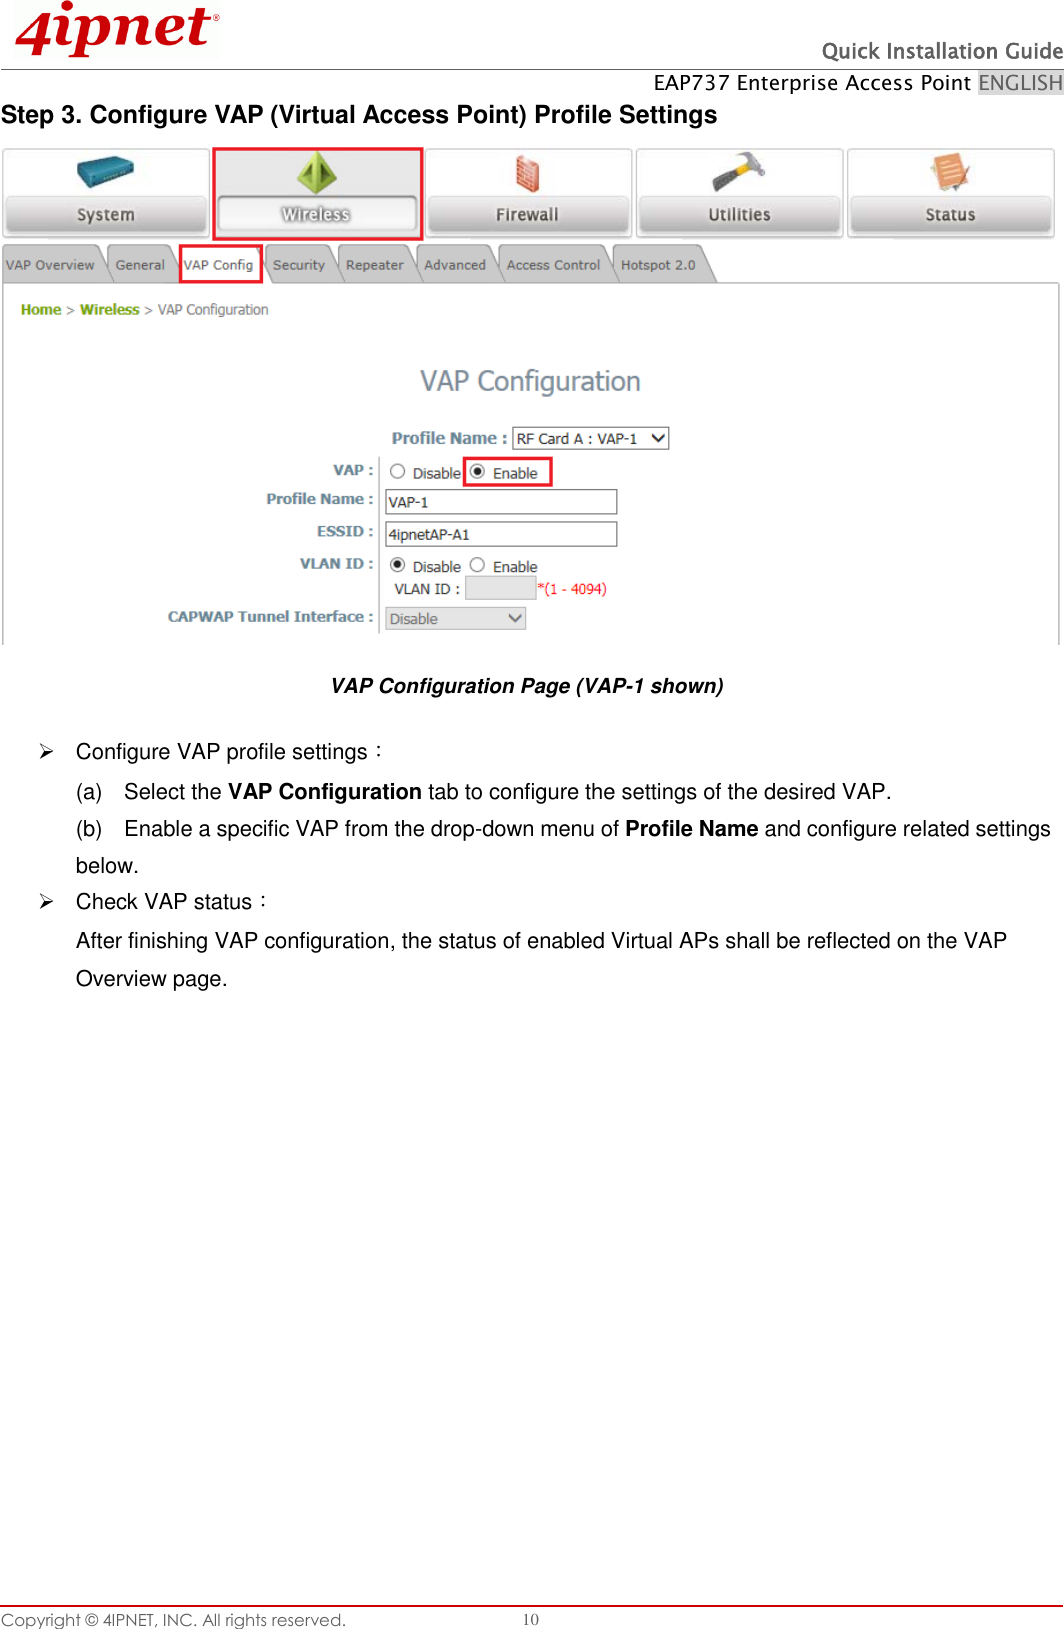  Quick Installation Guide EAP737 Enterprise Access Point ENGLISH Copyright ©  4IPNET, INC. All rights reserved.   10 Step 3. Configure VAP (Virtual Access Point) Profile Settings VAP Configuration Page (VAP-1 shown)   Configure VAP profile settings： (a)    Select the VAP Configuration tab to configure the settings of the desired VAP.   (b)    Enable a specific VAP from the drop-down menu of Profile Name and configure related settings below.   Check VAP status： After finishing VAP configuration, the status of enabled Virtual APs shall be reflected on the VAP Overview page.   